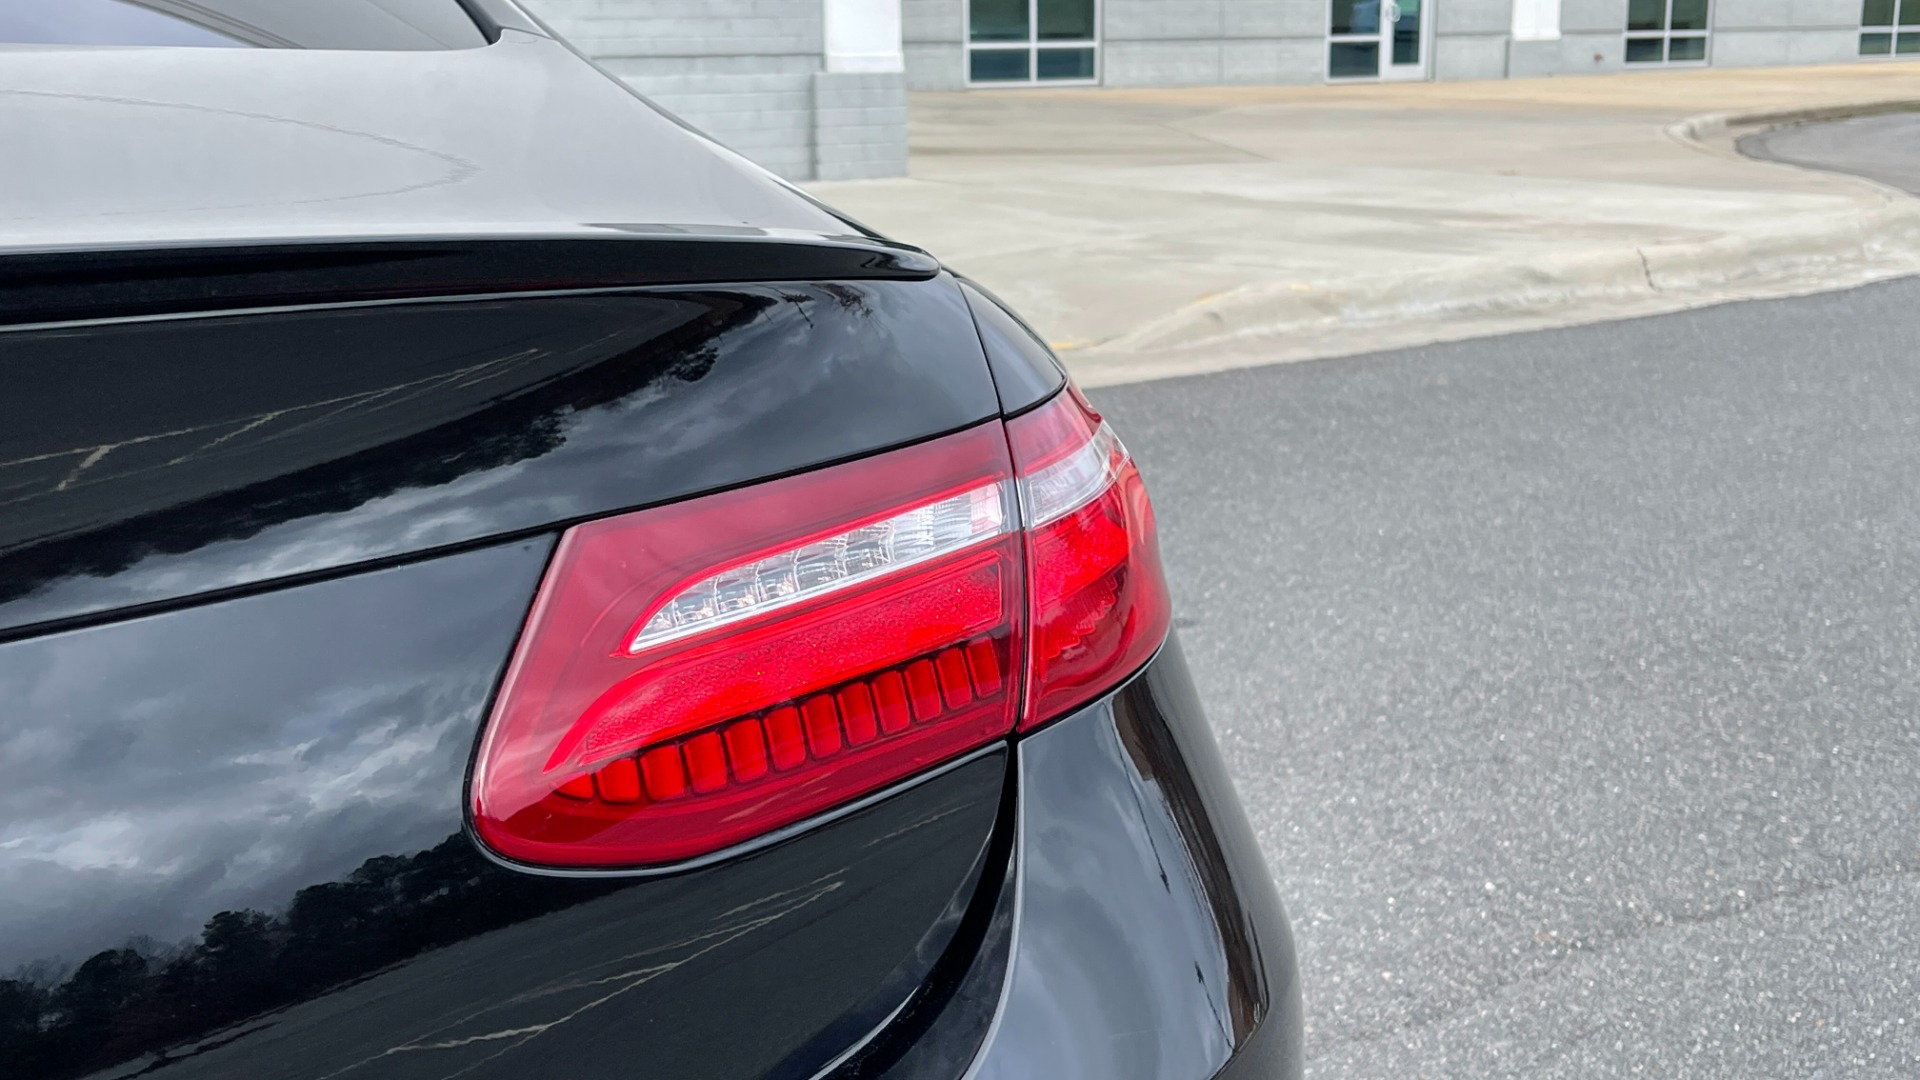 Used 2019 Mercedes-Benz E-CLASS E 450 PREMIUM / AMG LINE / PARK ASST / BSA / BURMESTER for sale $49,995 at Formula Imports in Charlotte NC 28227 18